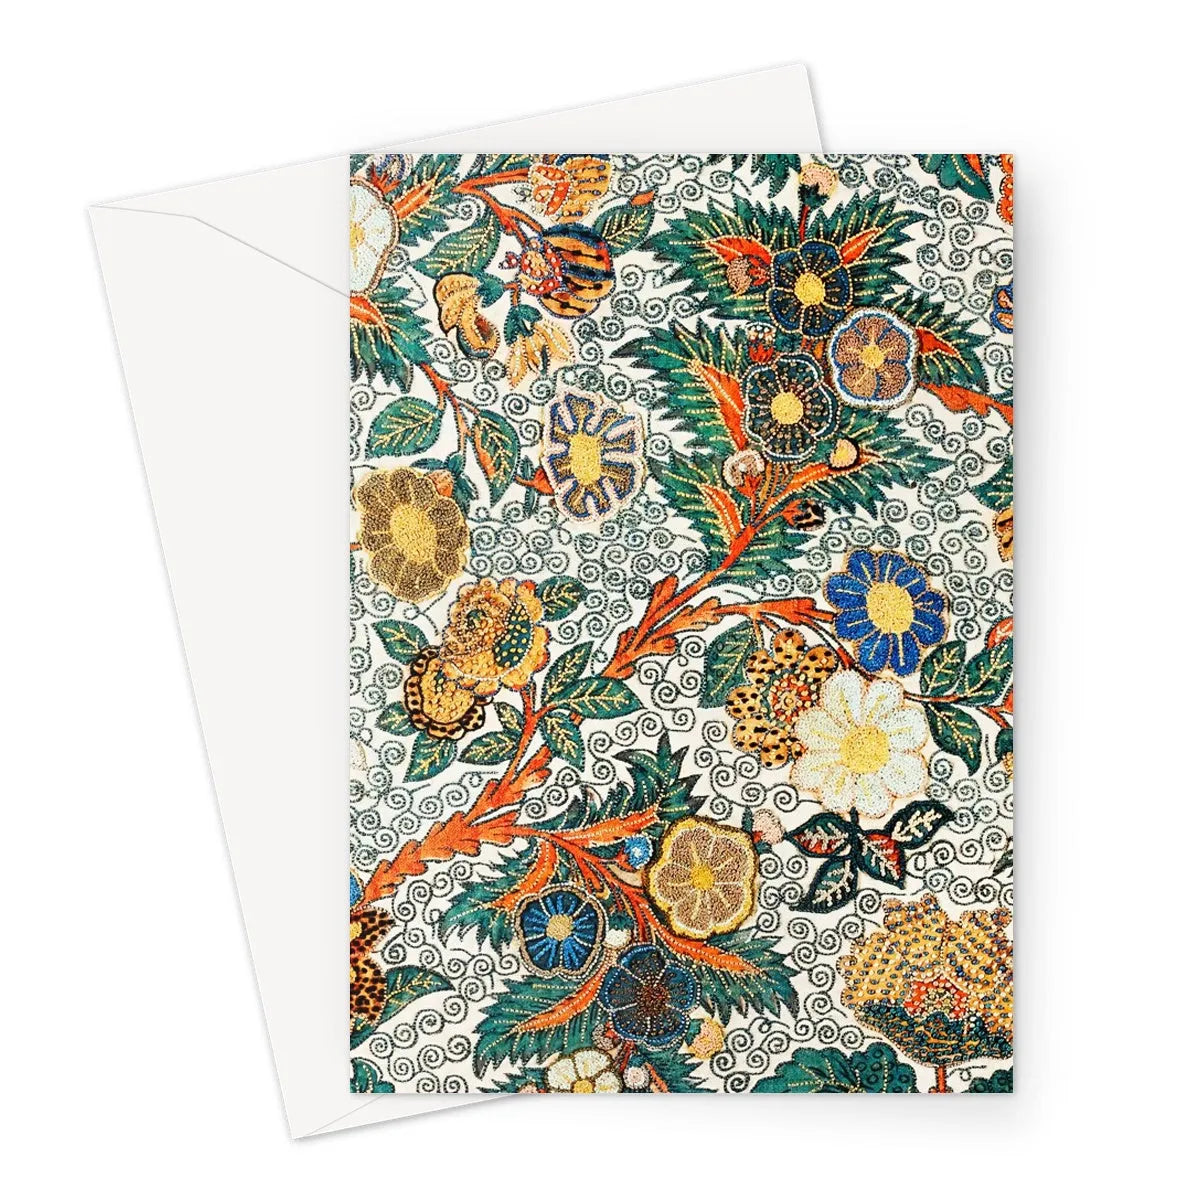 Blossomewhere Japanese Tapestry Art Greeting Card - Greeting & Note Cards - Aesthetic Art